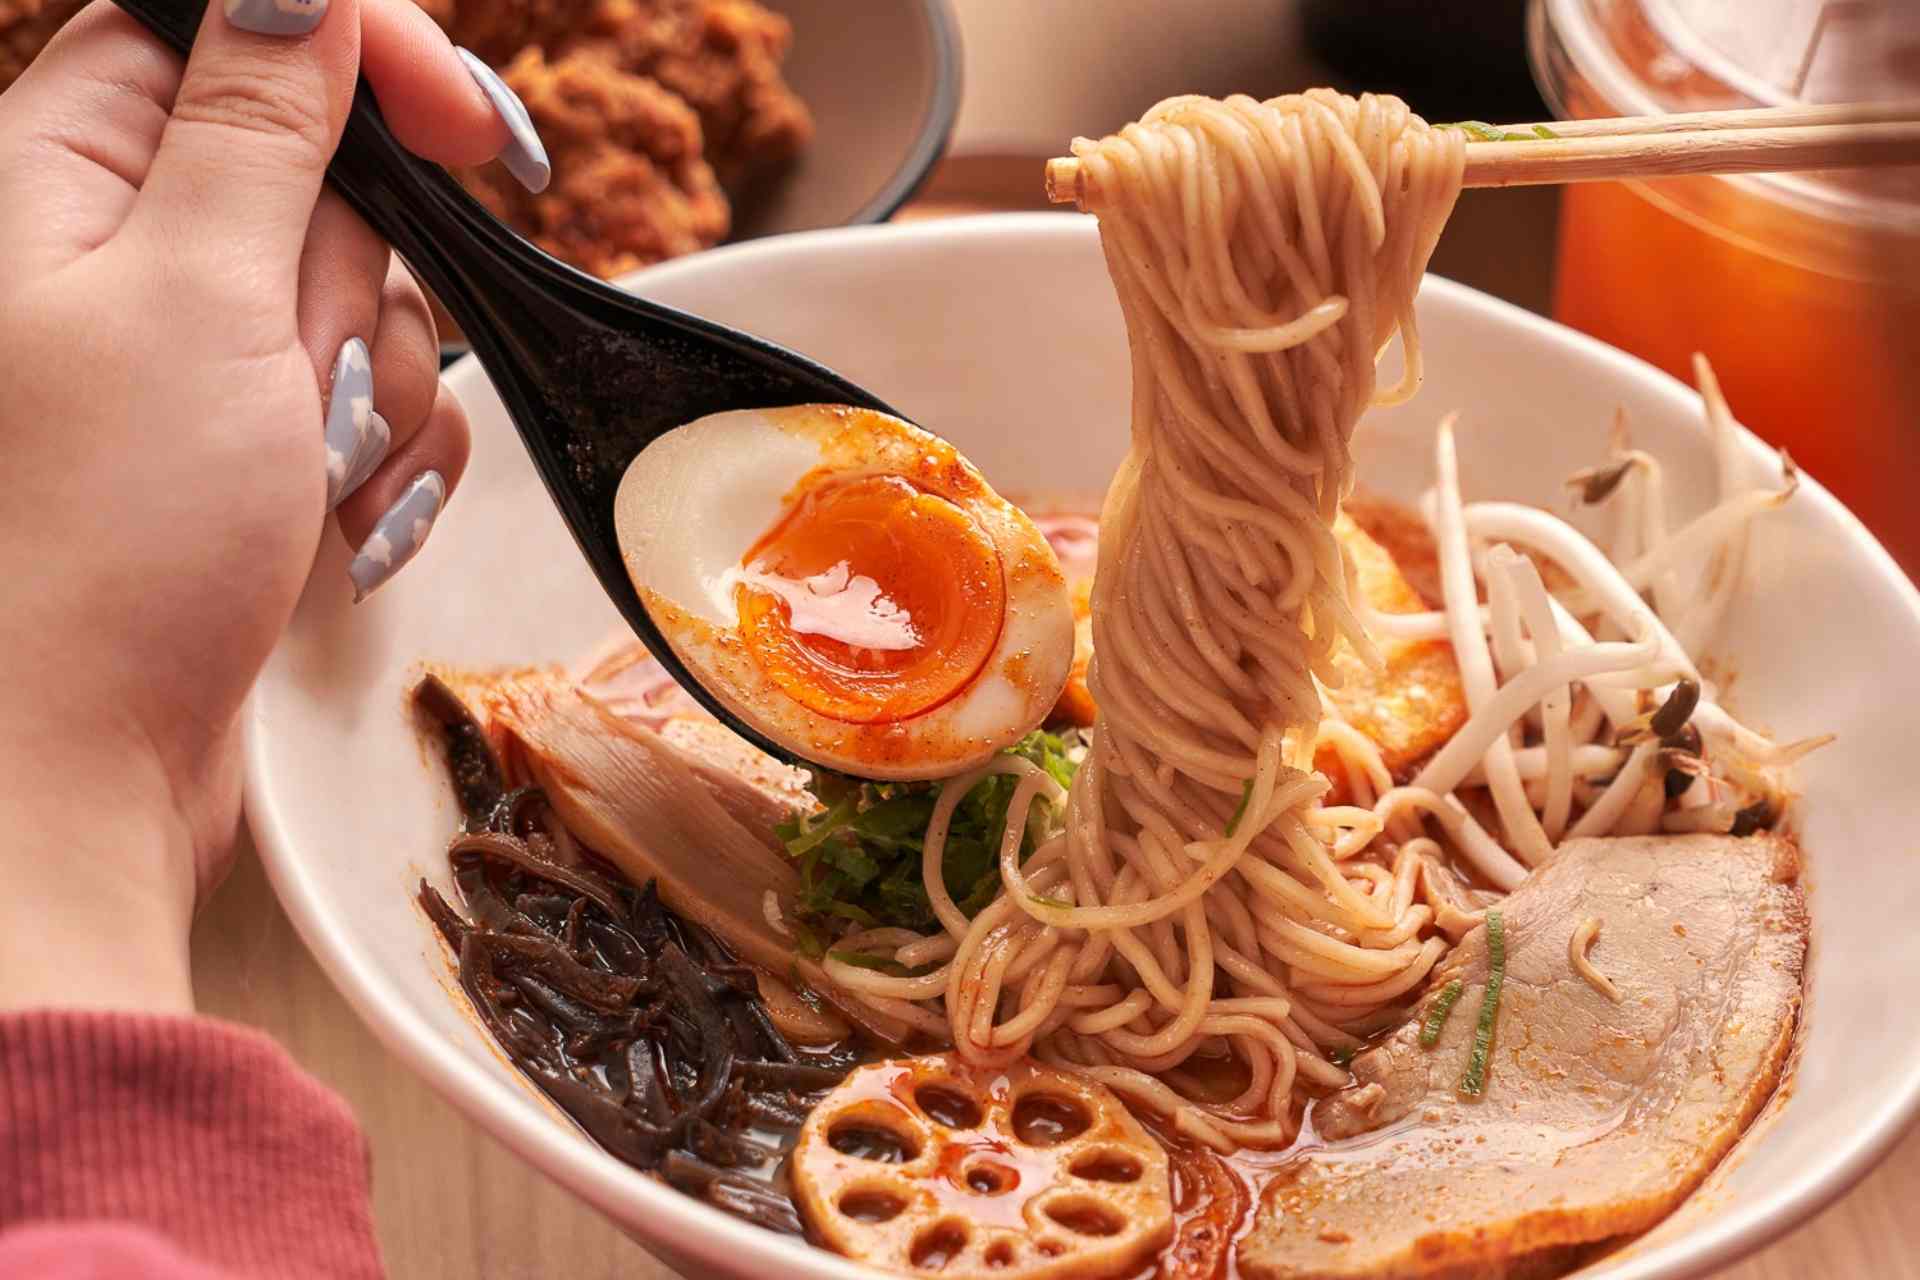 10 Best Places to Go for Cheap Eats in Glebe - Motto Motto Ramen at Broadway Shopping Centre